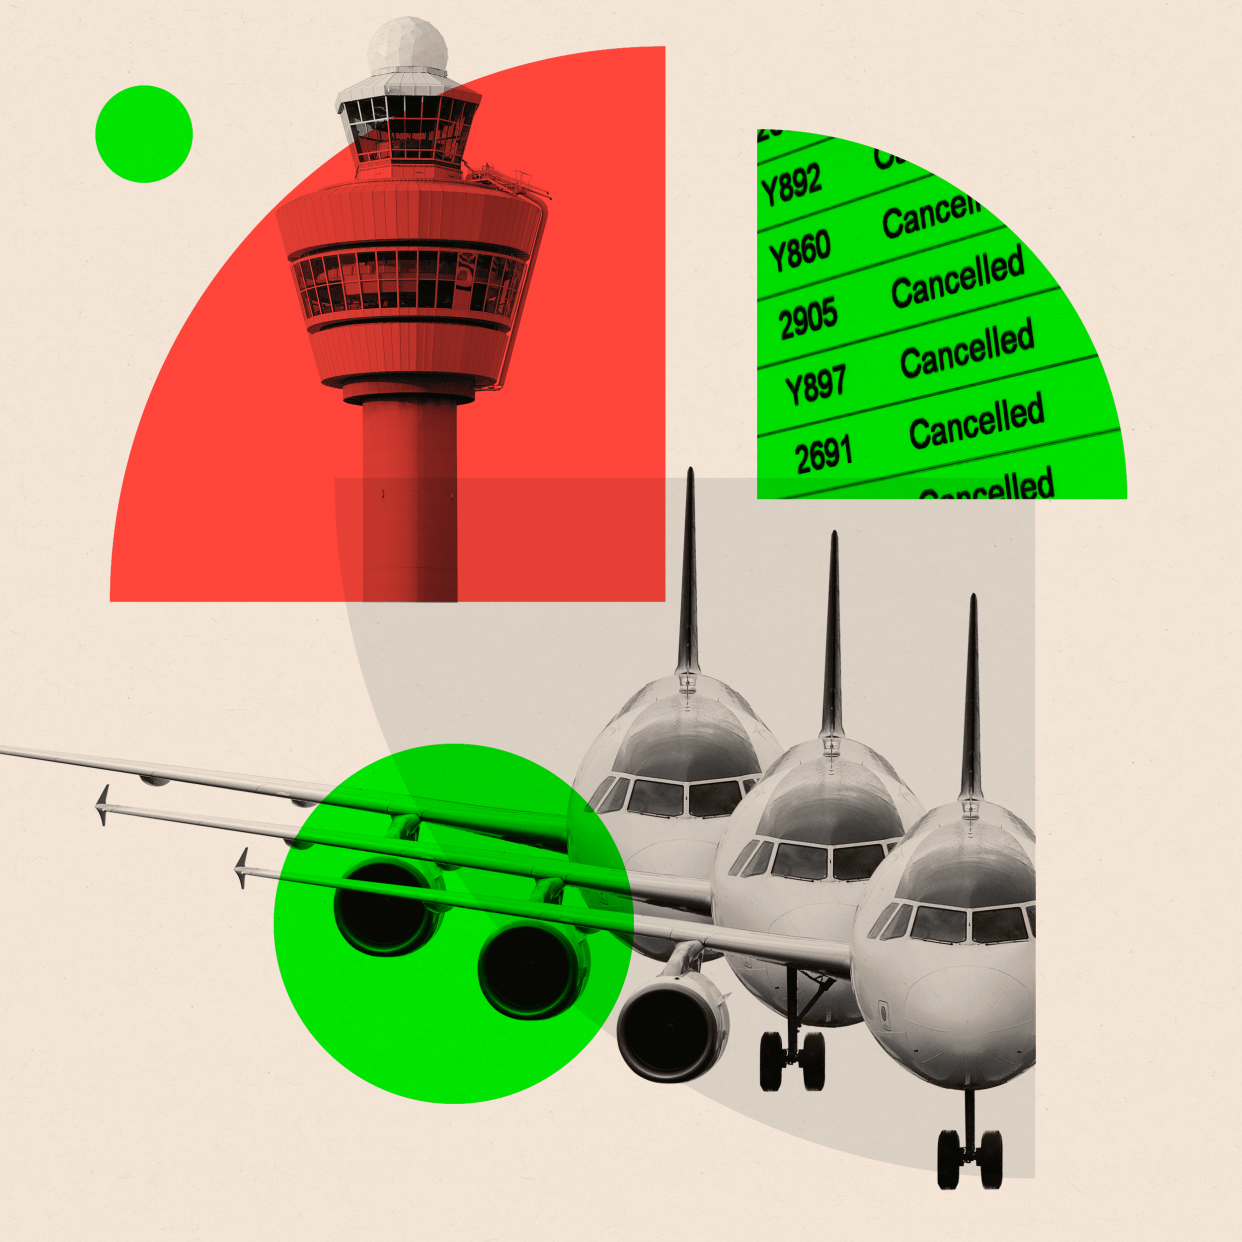 Montage showing aeroplanes and an air traffic control tower